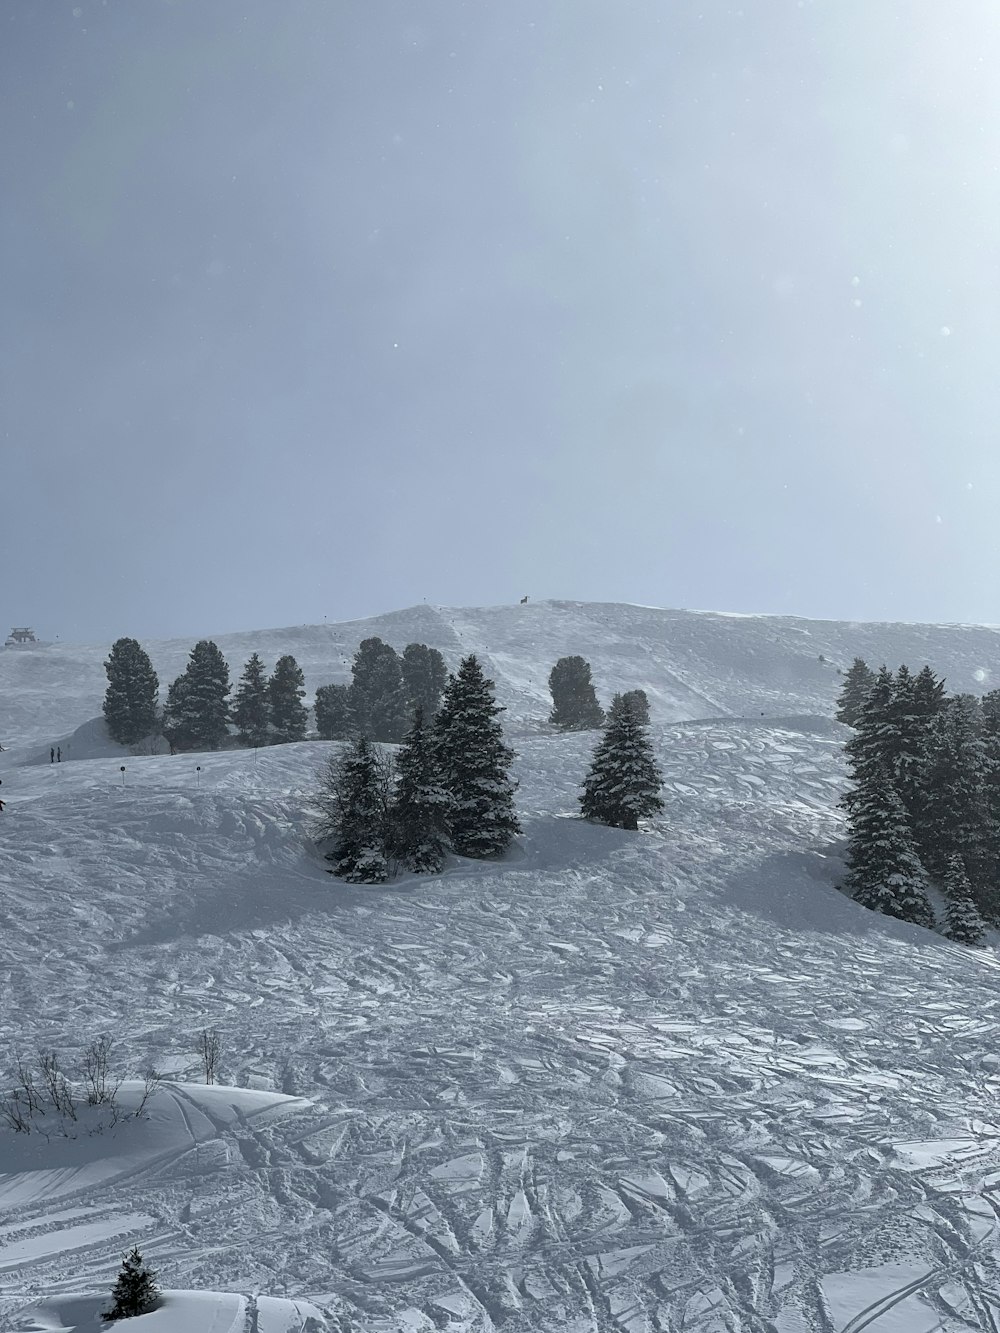 a snow covered ski slope with trees in the background